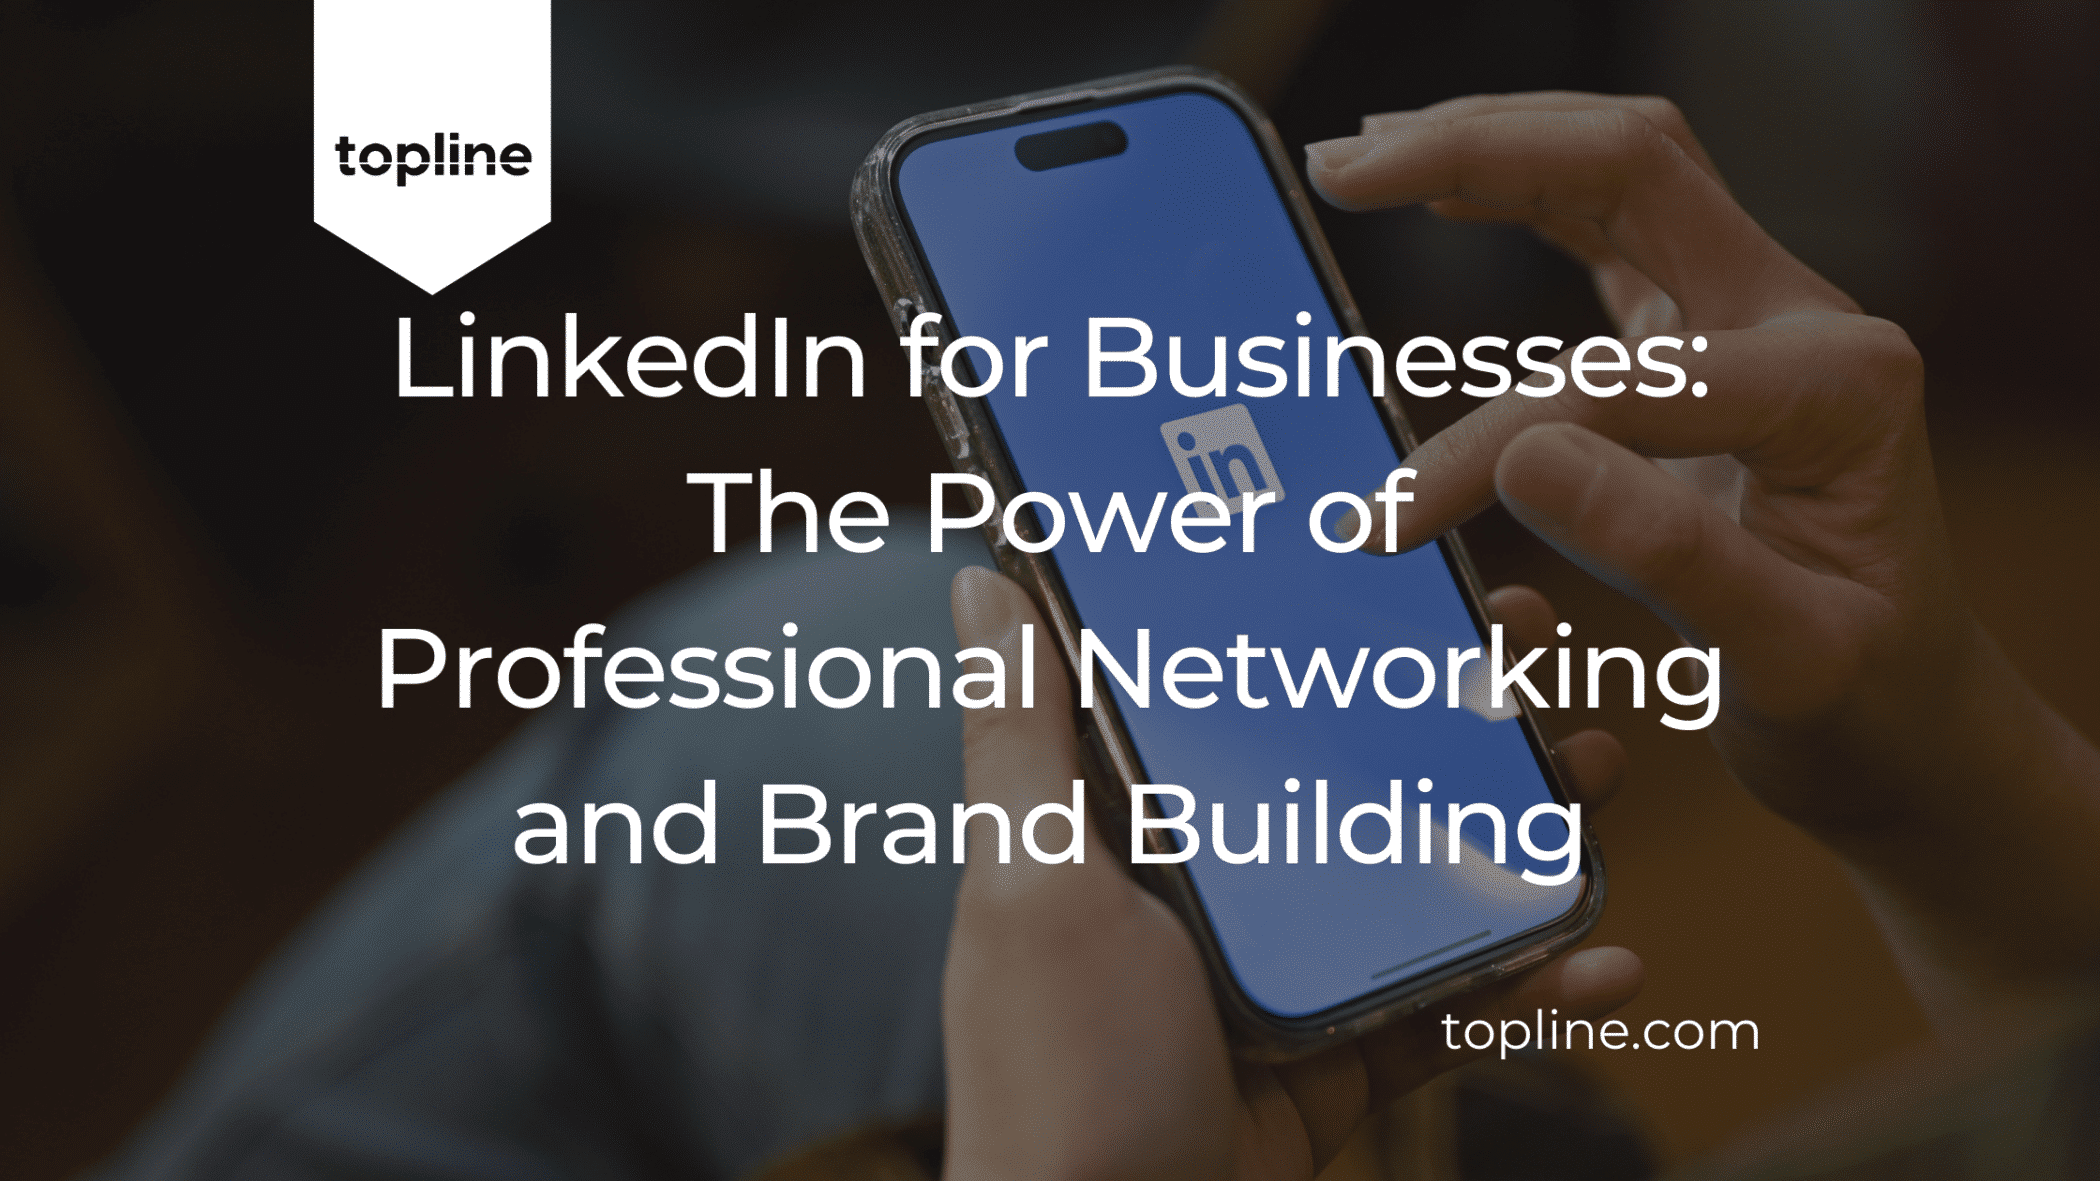 LinkedIn for Businesses: The Power of Professional Networking and Brand Building